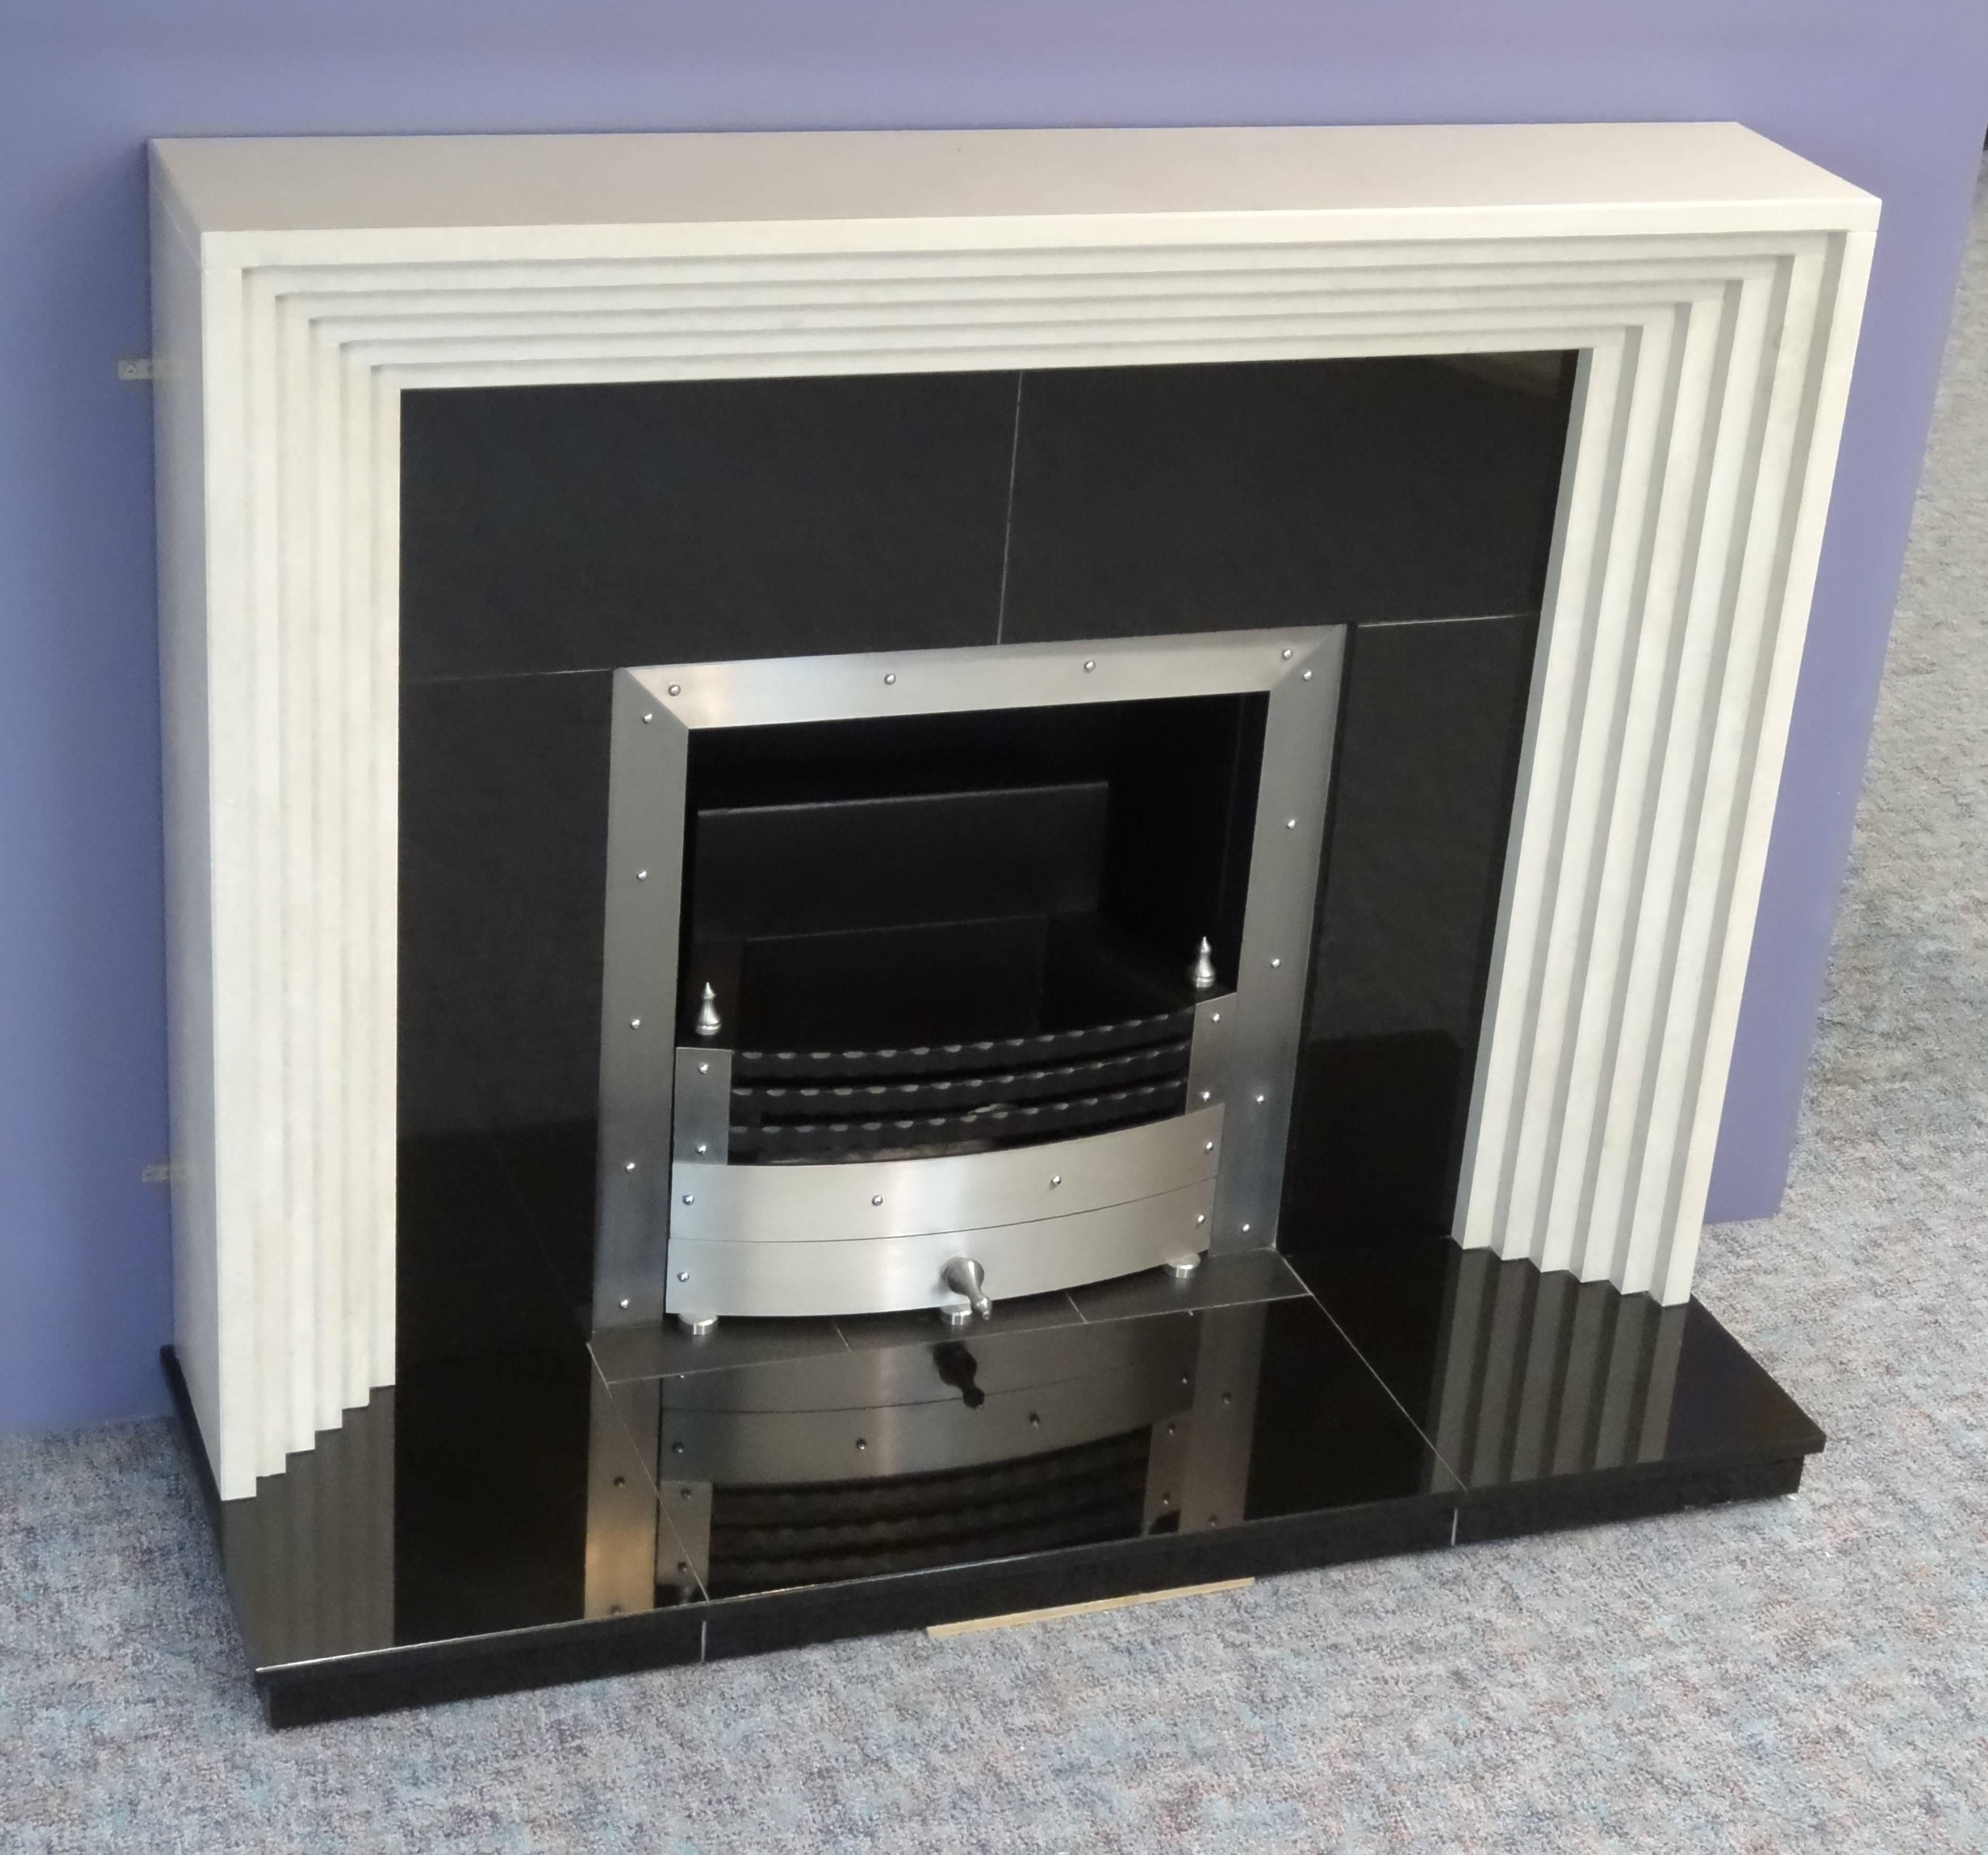 We created this Art Deco fire surround from polished Greek Goran marble. The fireplace comprises of polished black granite hearth and insert, the brushed steel frame is built in to the
granite insert, the matching steel fire basket is